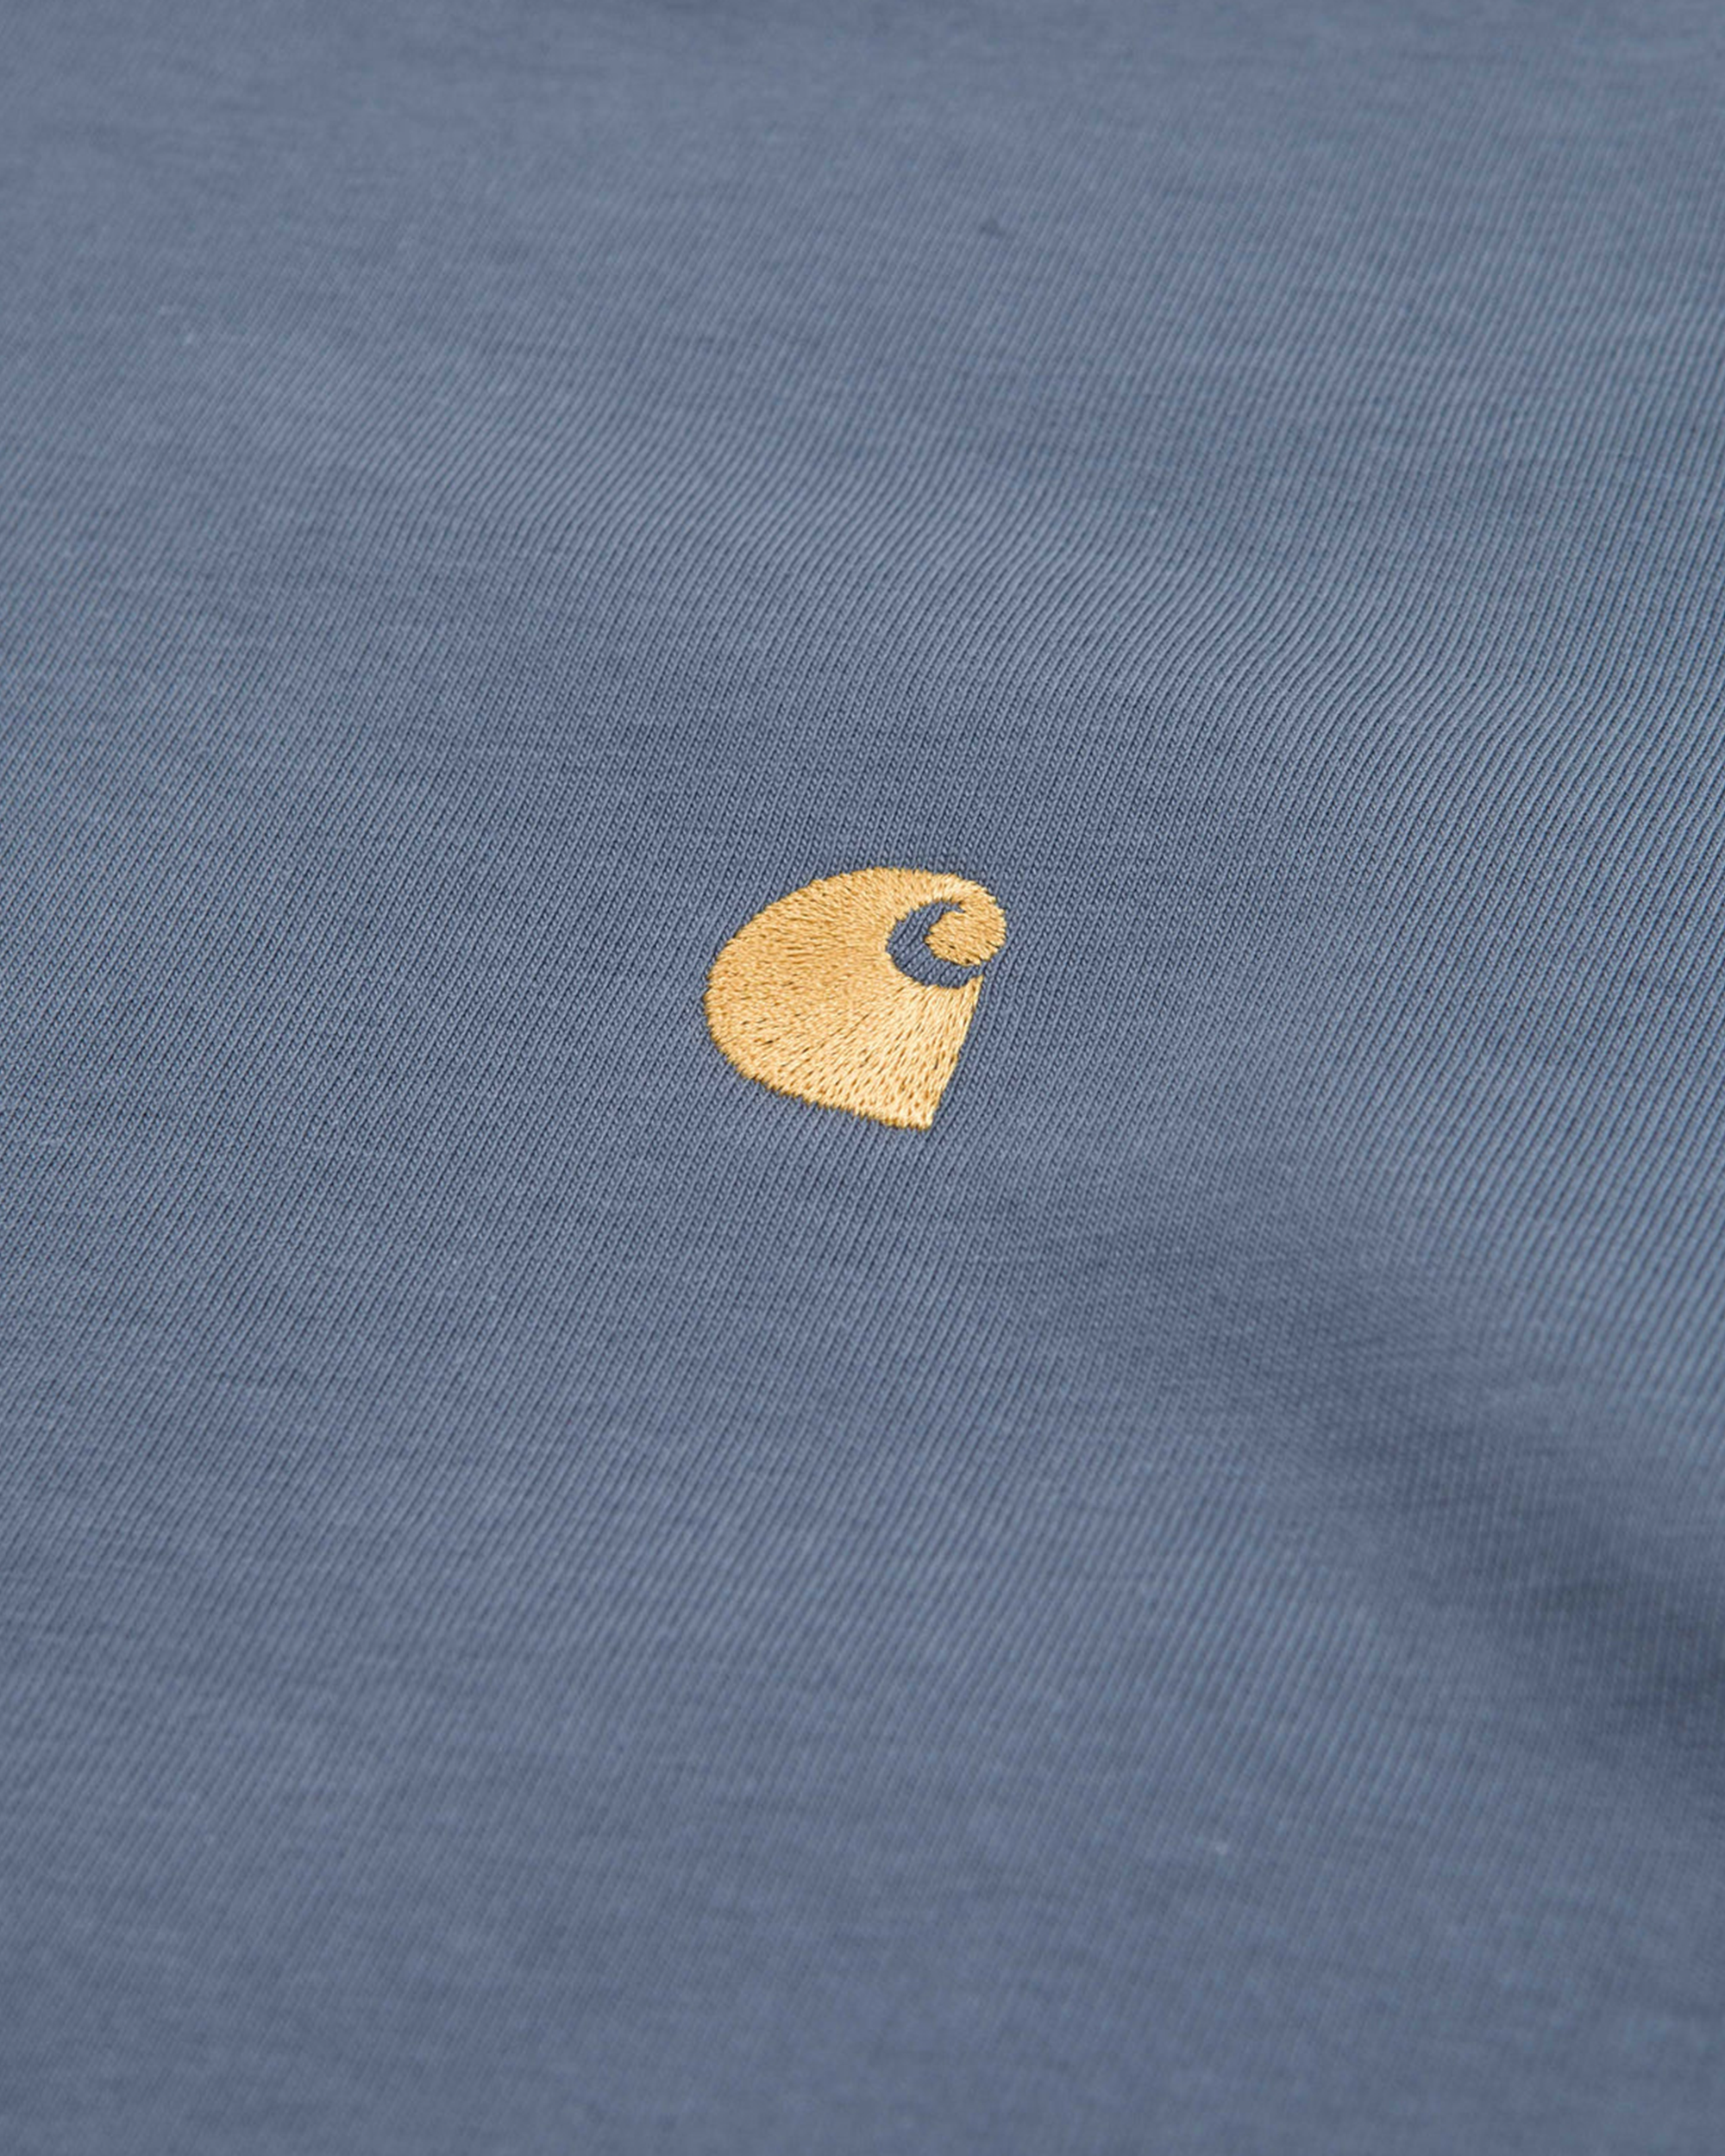 Chase T-Shirt - Storm Blue / Gold